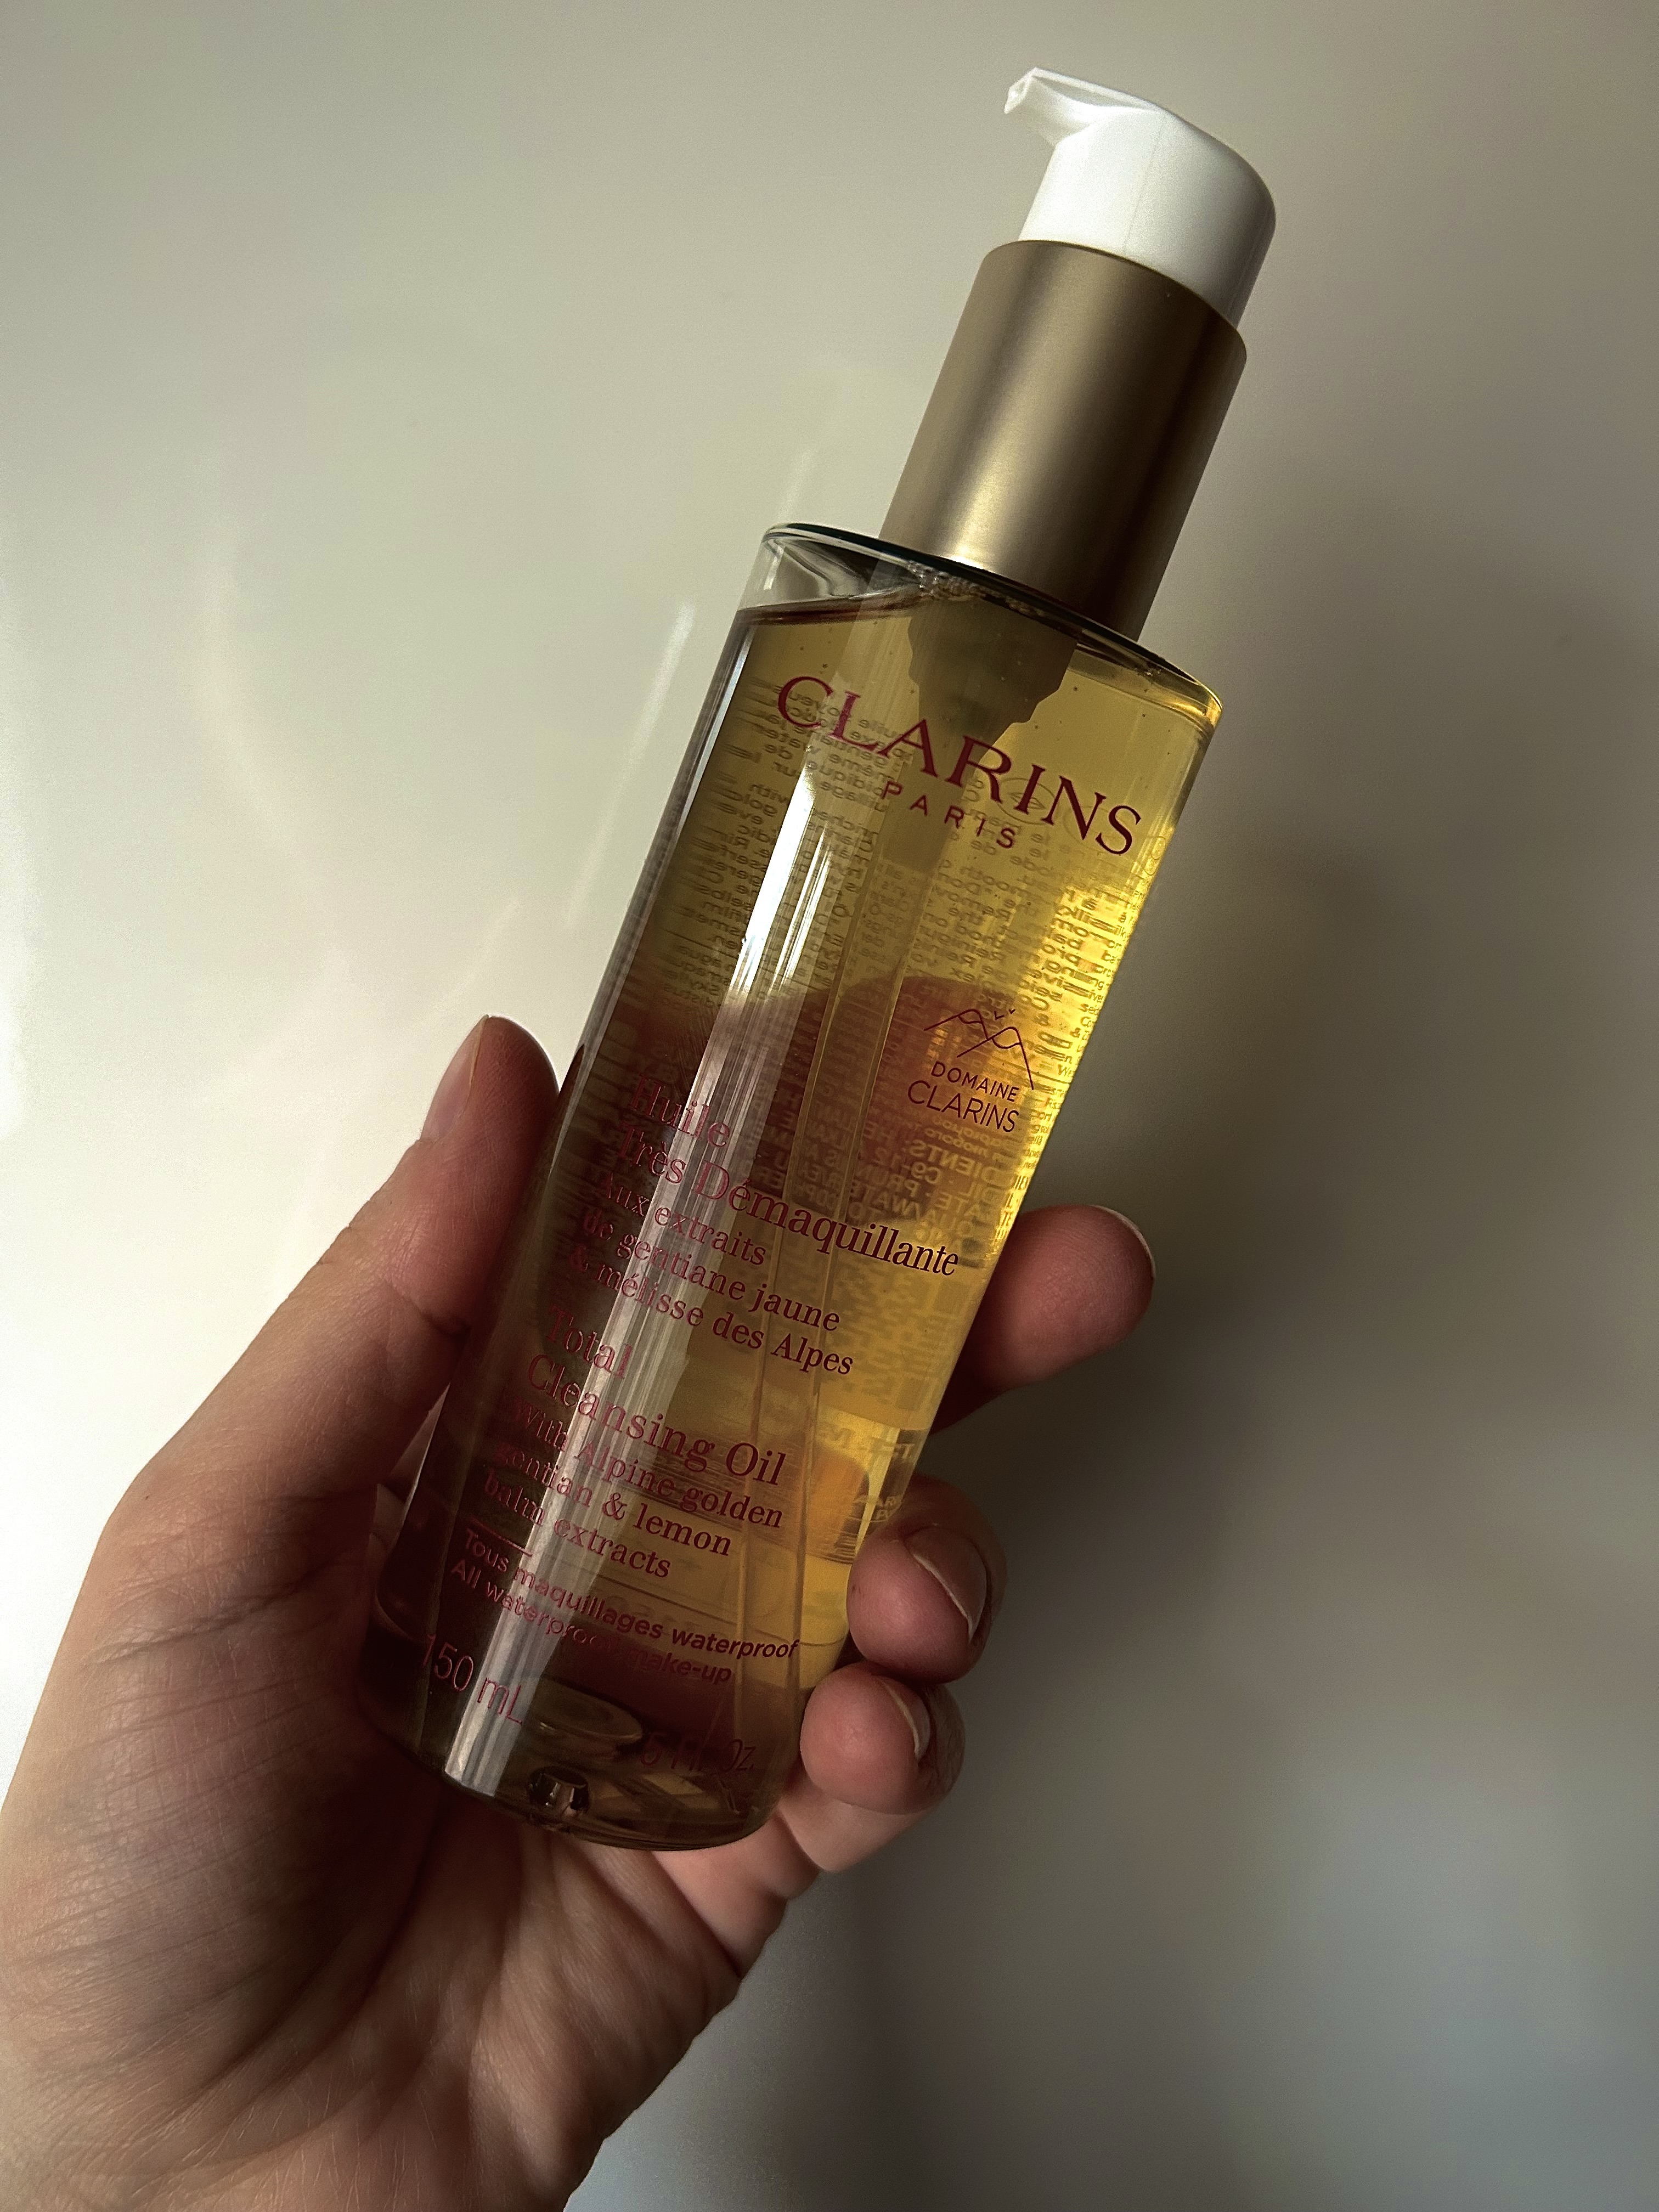 Clarins total cleansing oil…